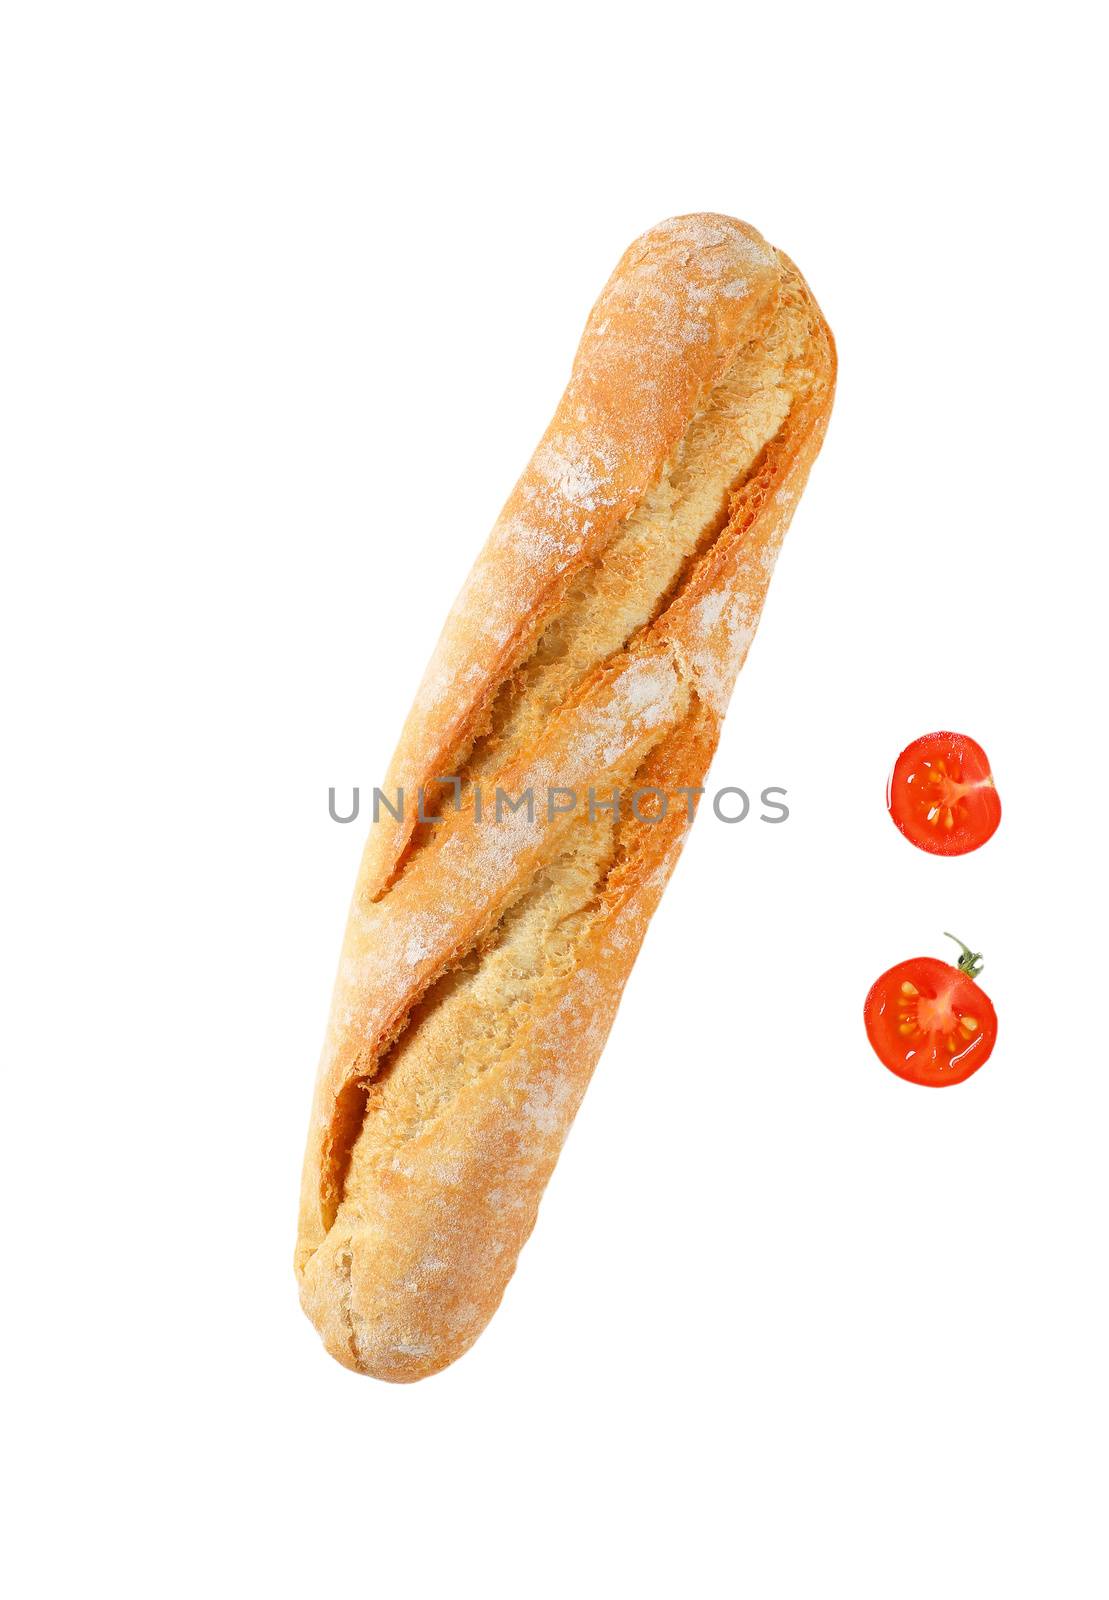 short French baguette, rosemary and cherry tomato on white background